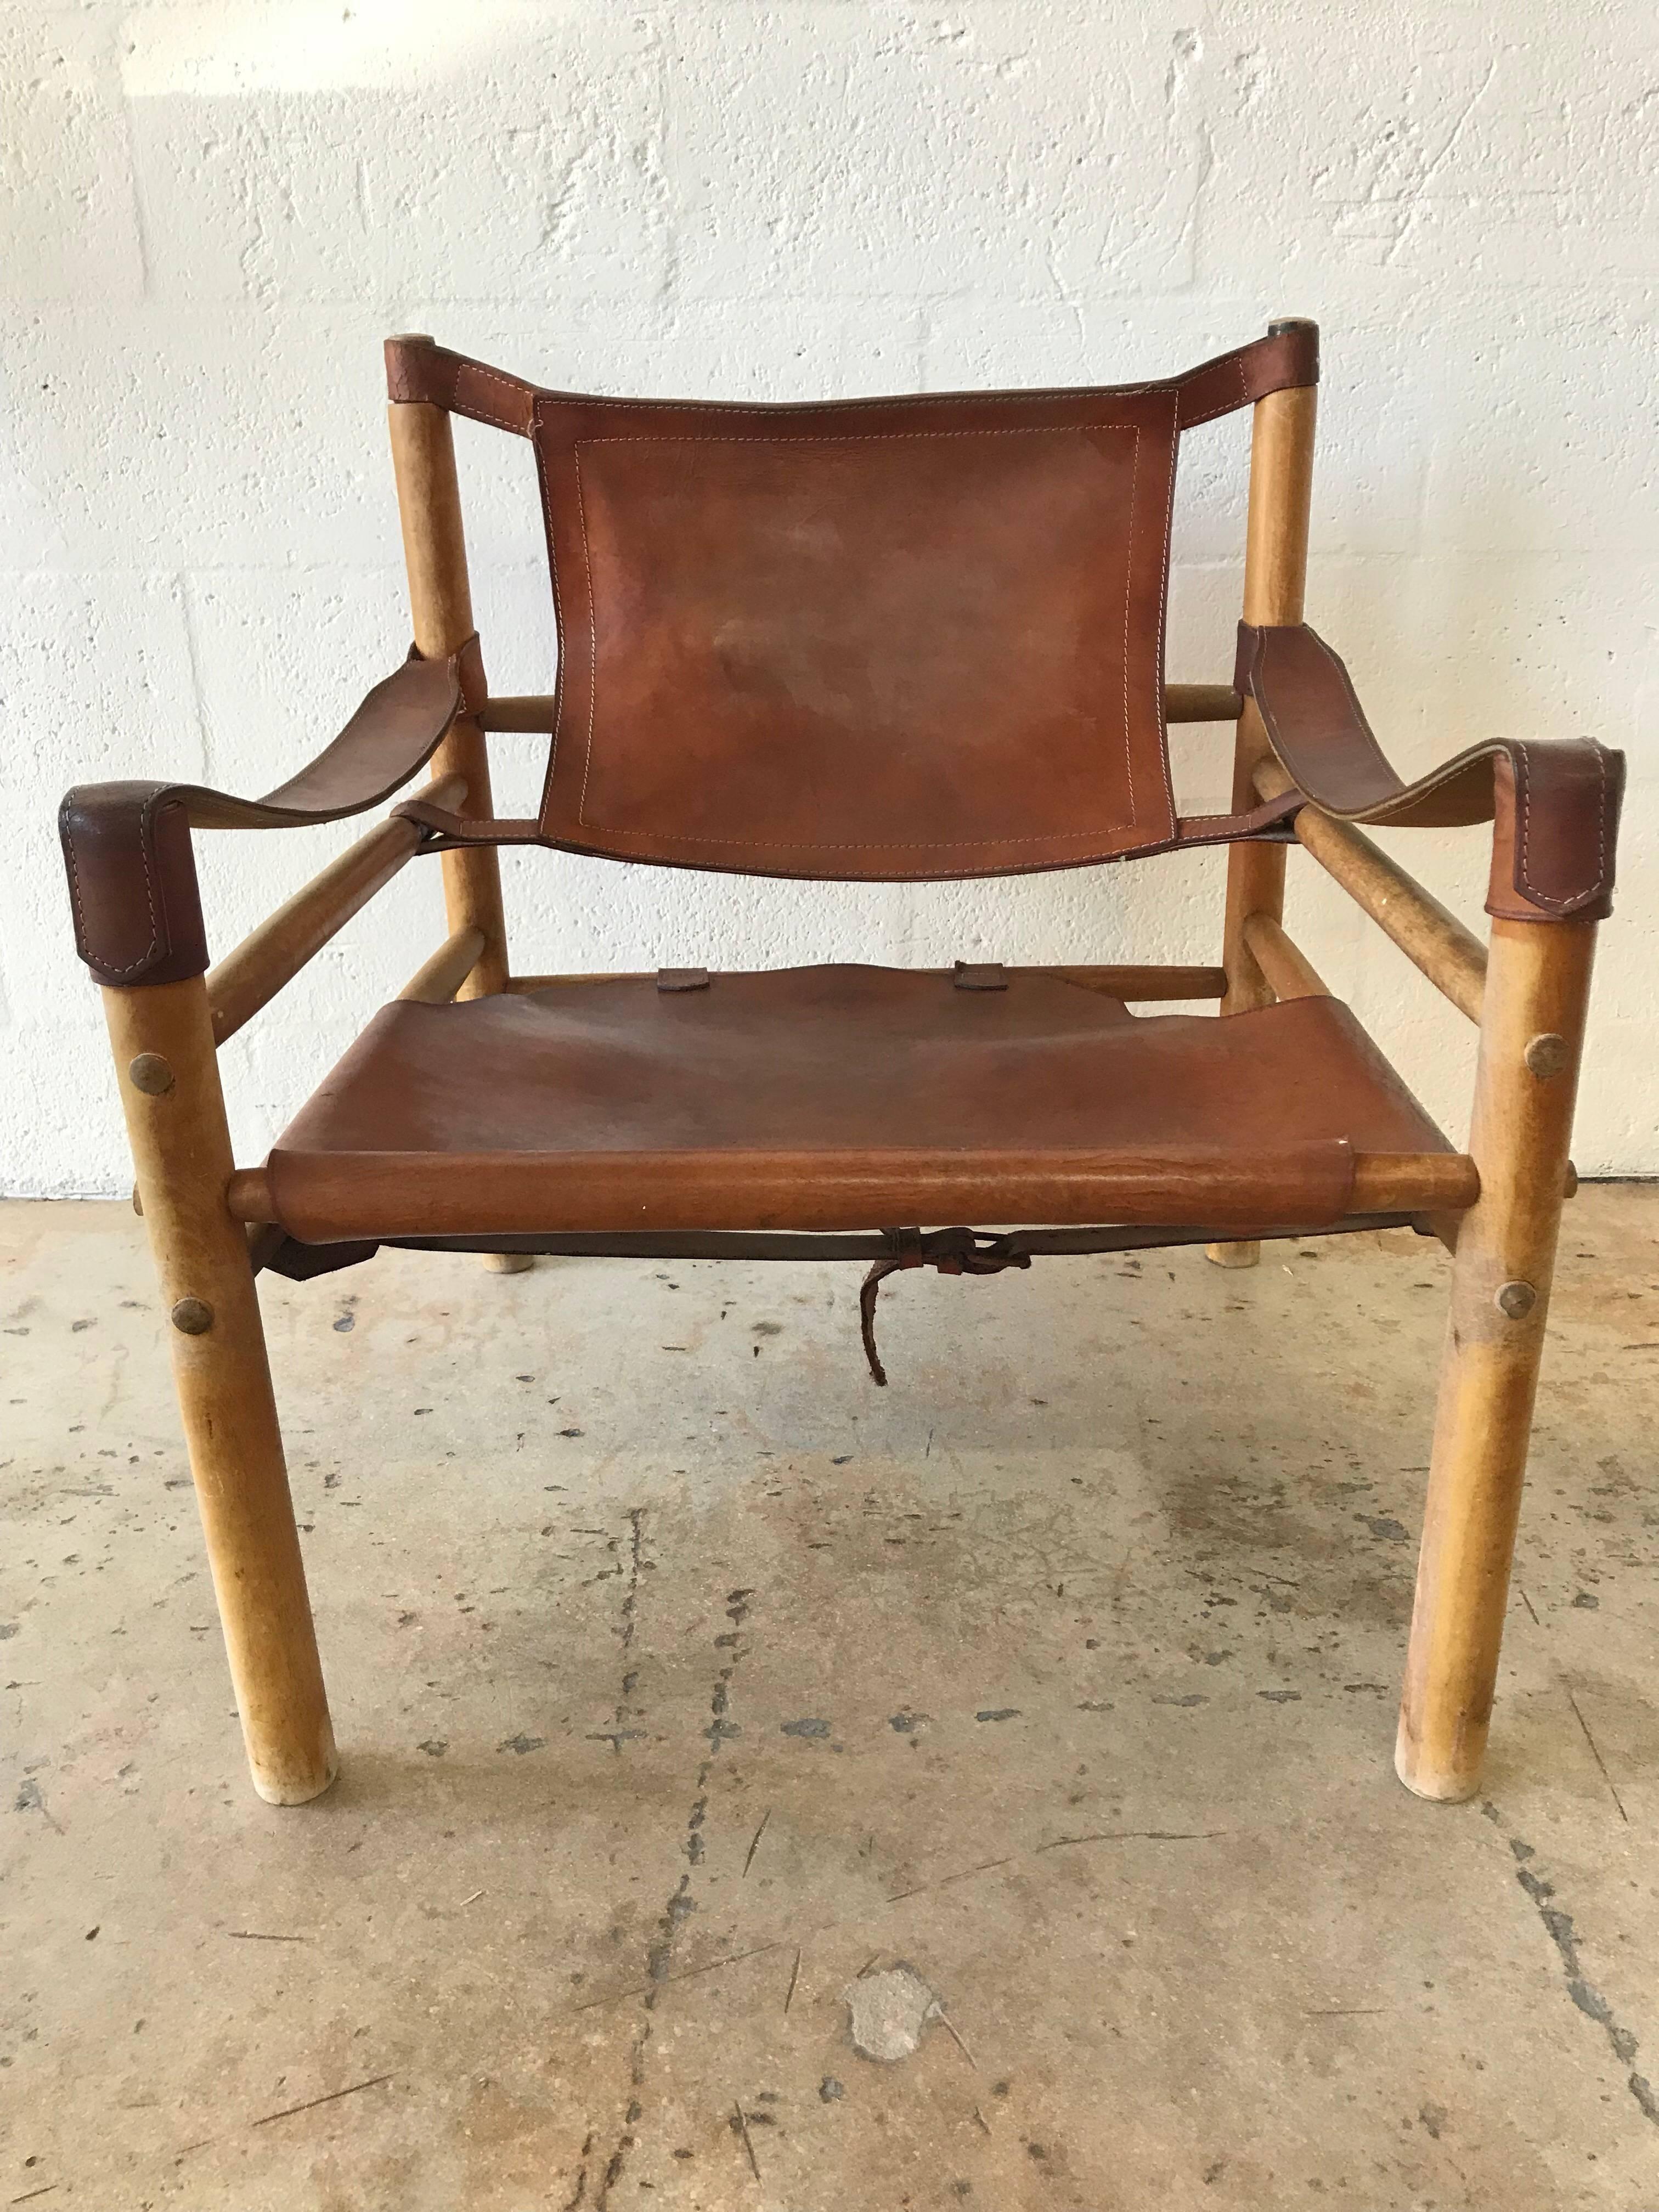 Early original distressed saddle leather Sirocco, safari, Campaign armchair designed by Arne Norell.